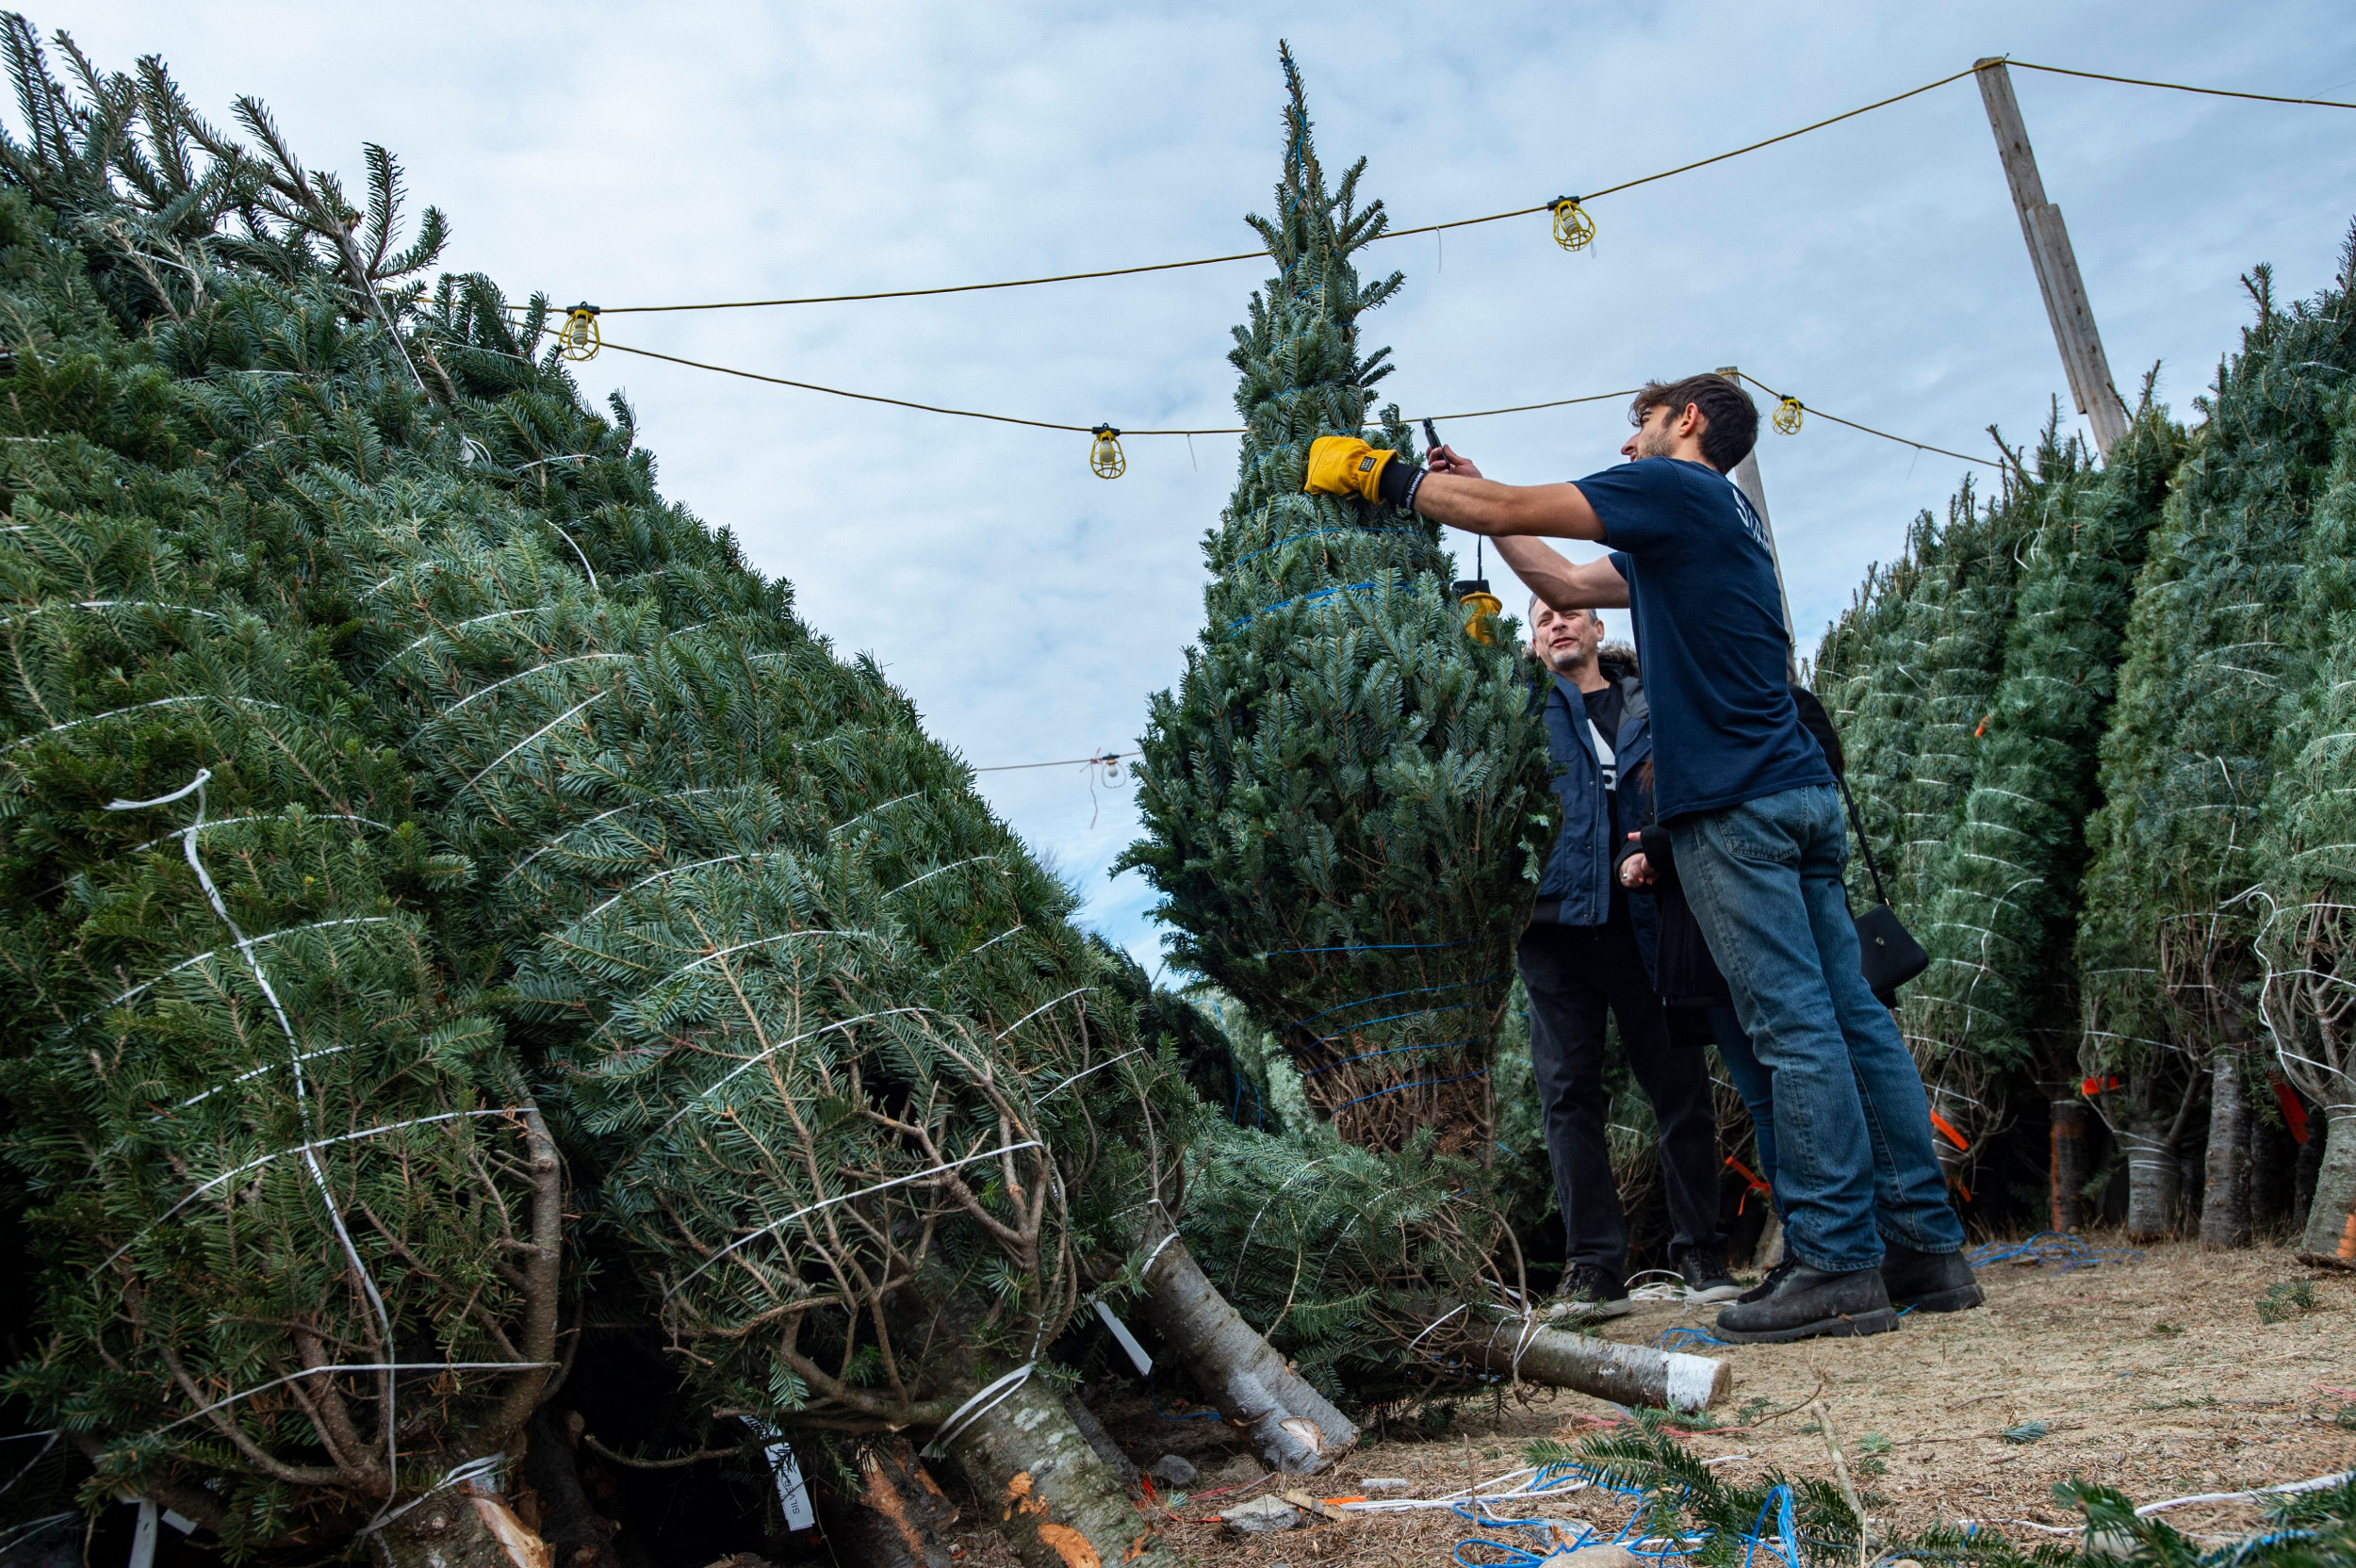 Christmas Tree Shortage Due to Supply Chain as Shoppers Urged to Buy